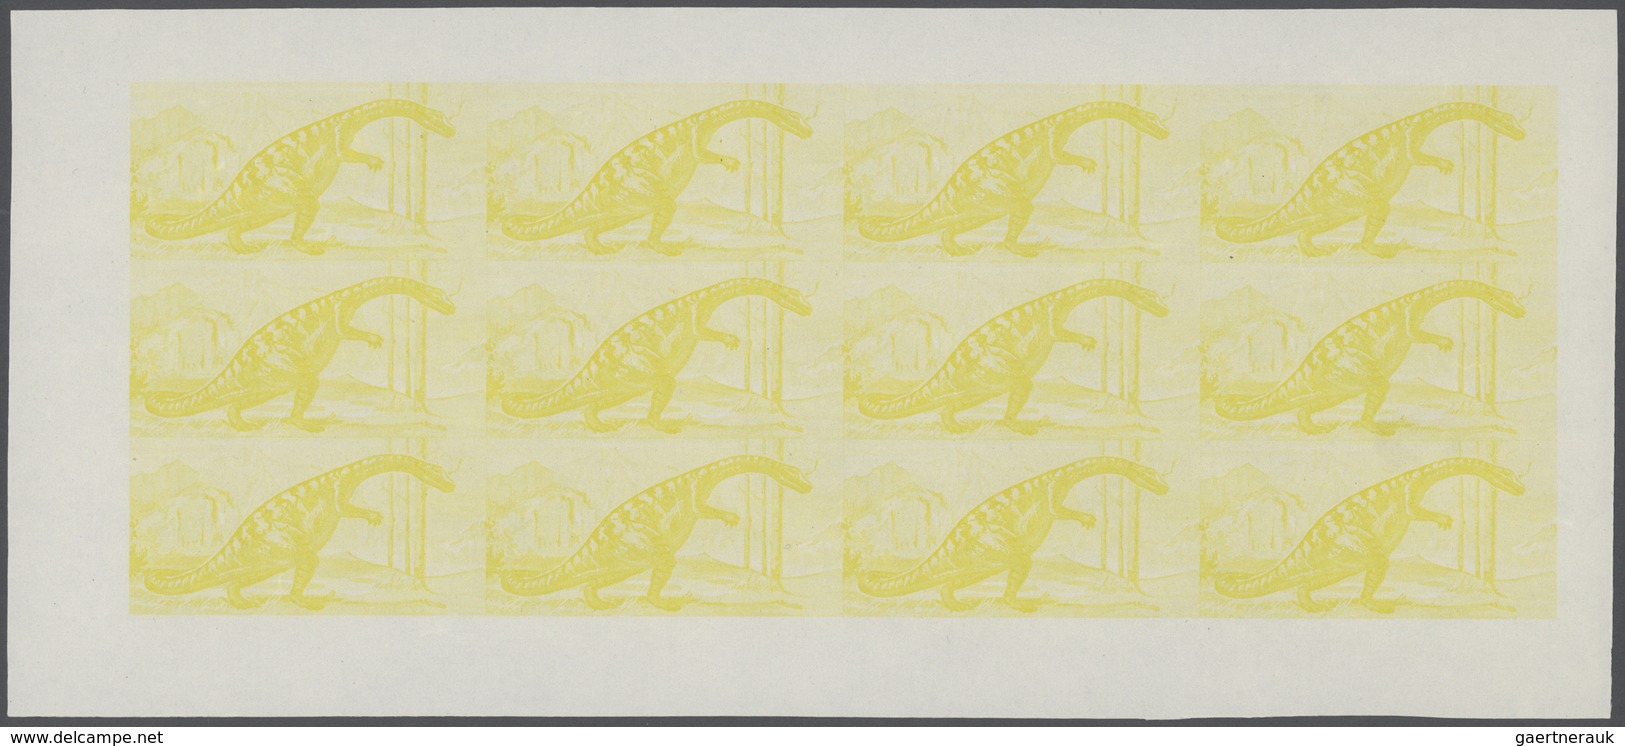 25686 Thematik: Tiere-Dinosaurier / animals-dinosaur: 1968, Fujeira. Progressive proofs set of sheets for